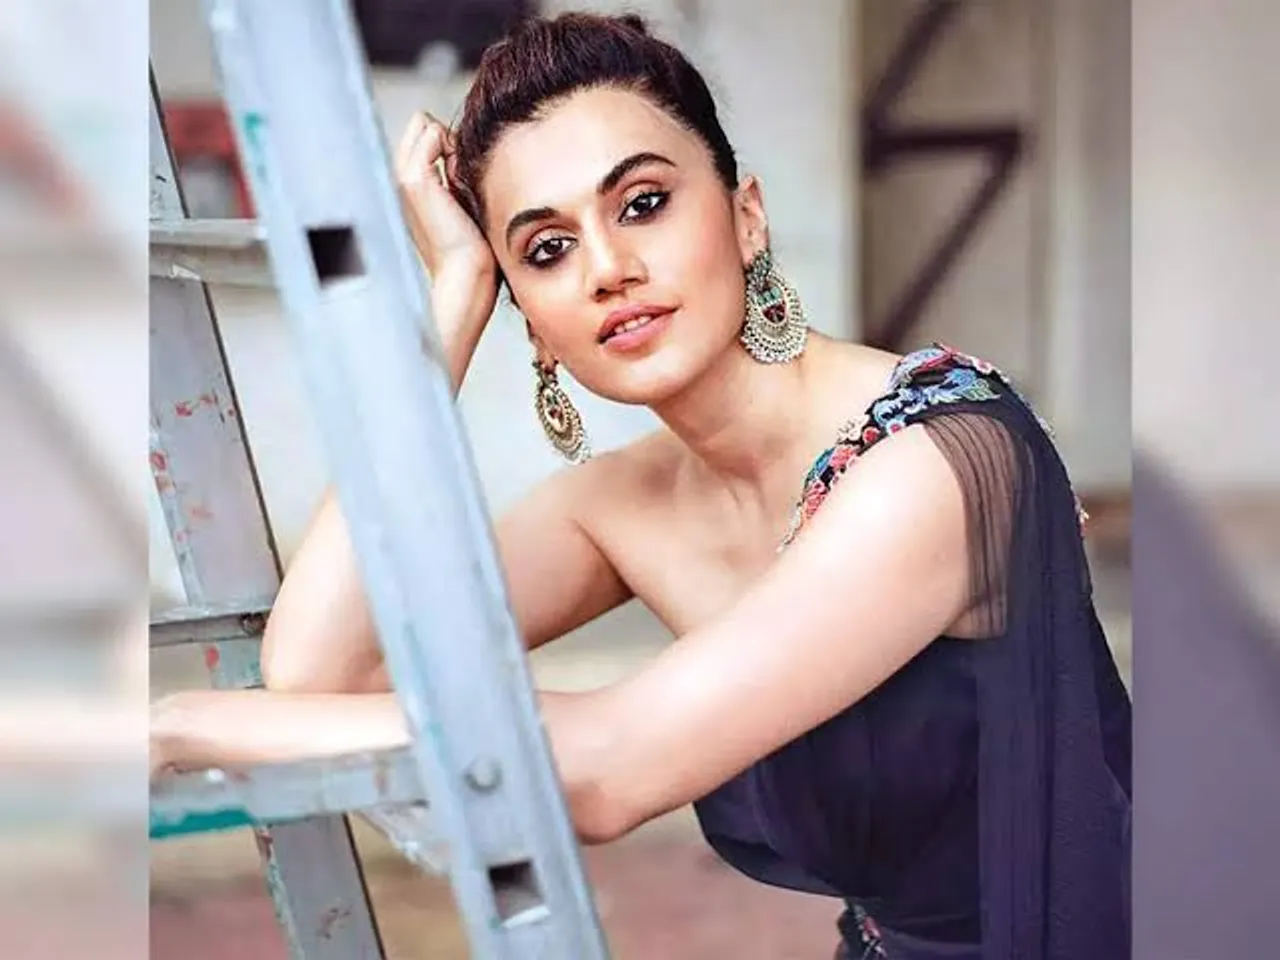 Taapsee Pannu bags Indian Film Institute’s Best Actor (Female) 2021 award for ‘Haseen Dilruba’!